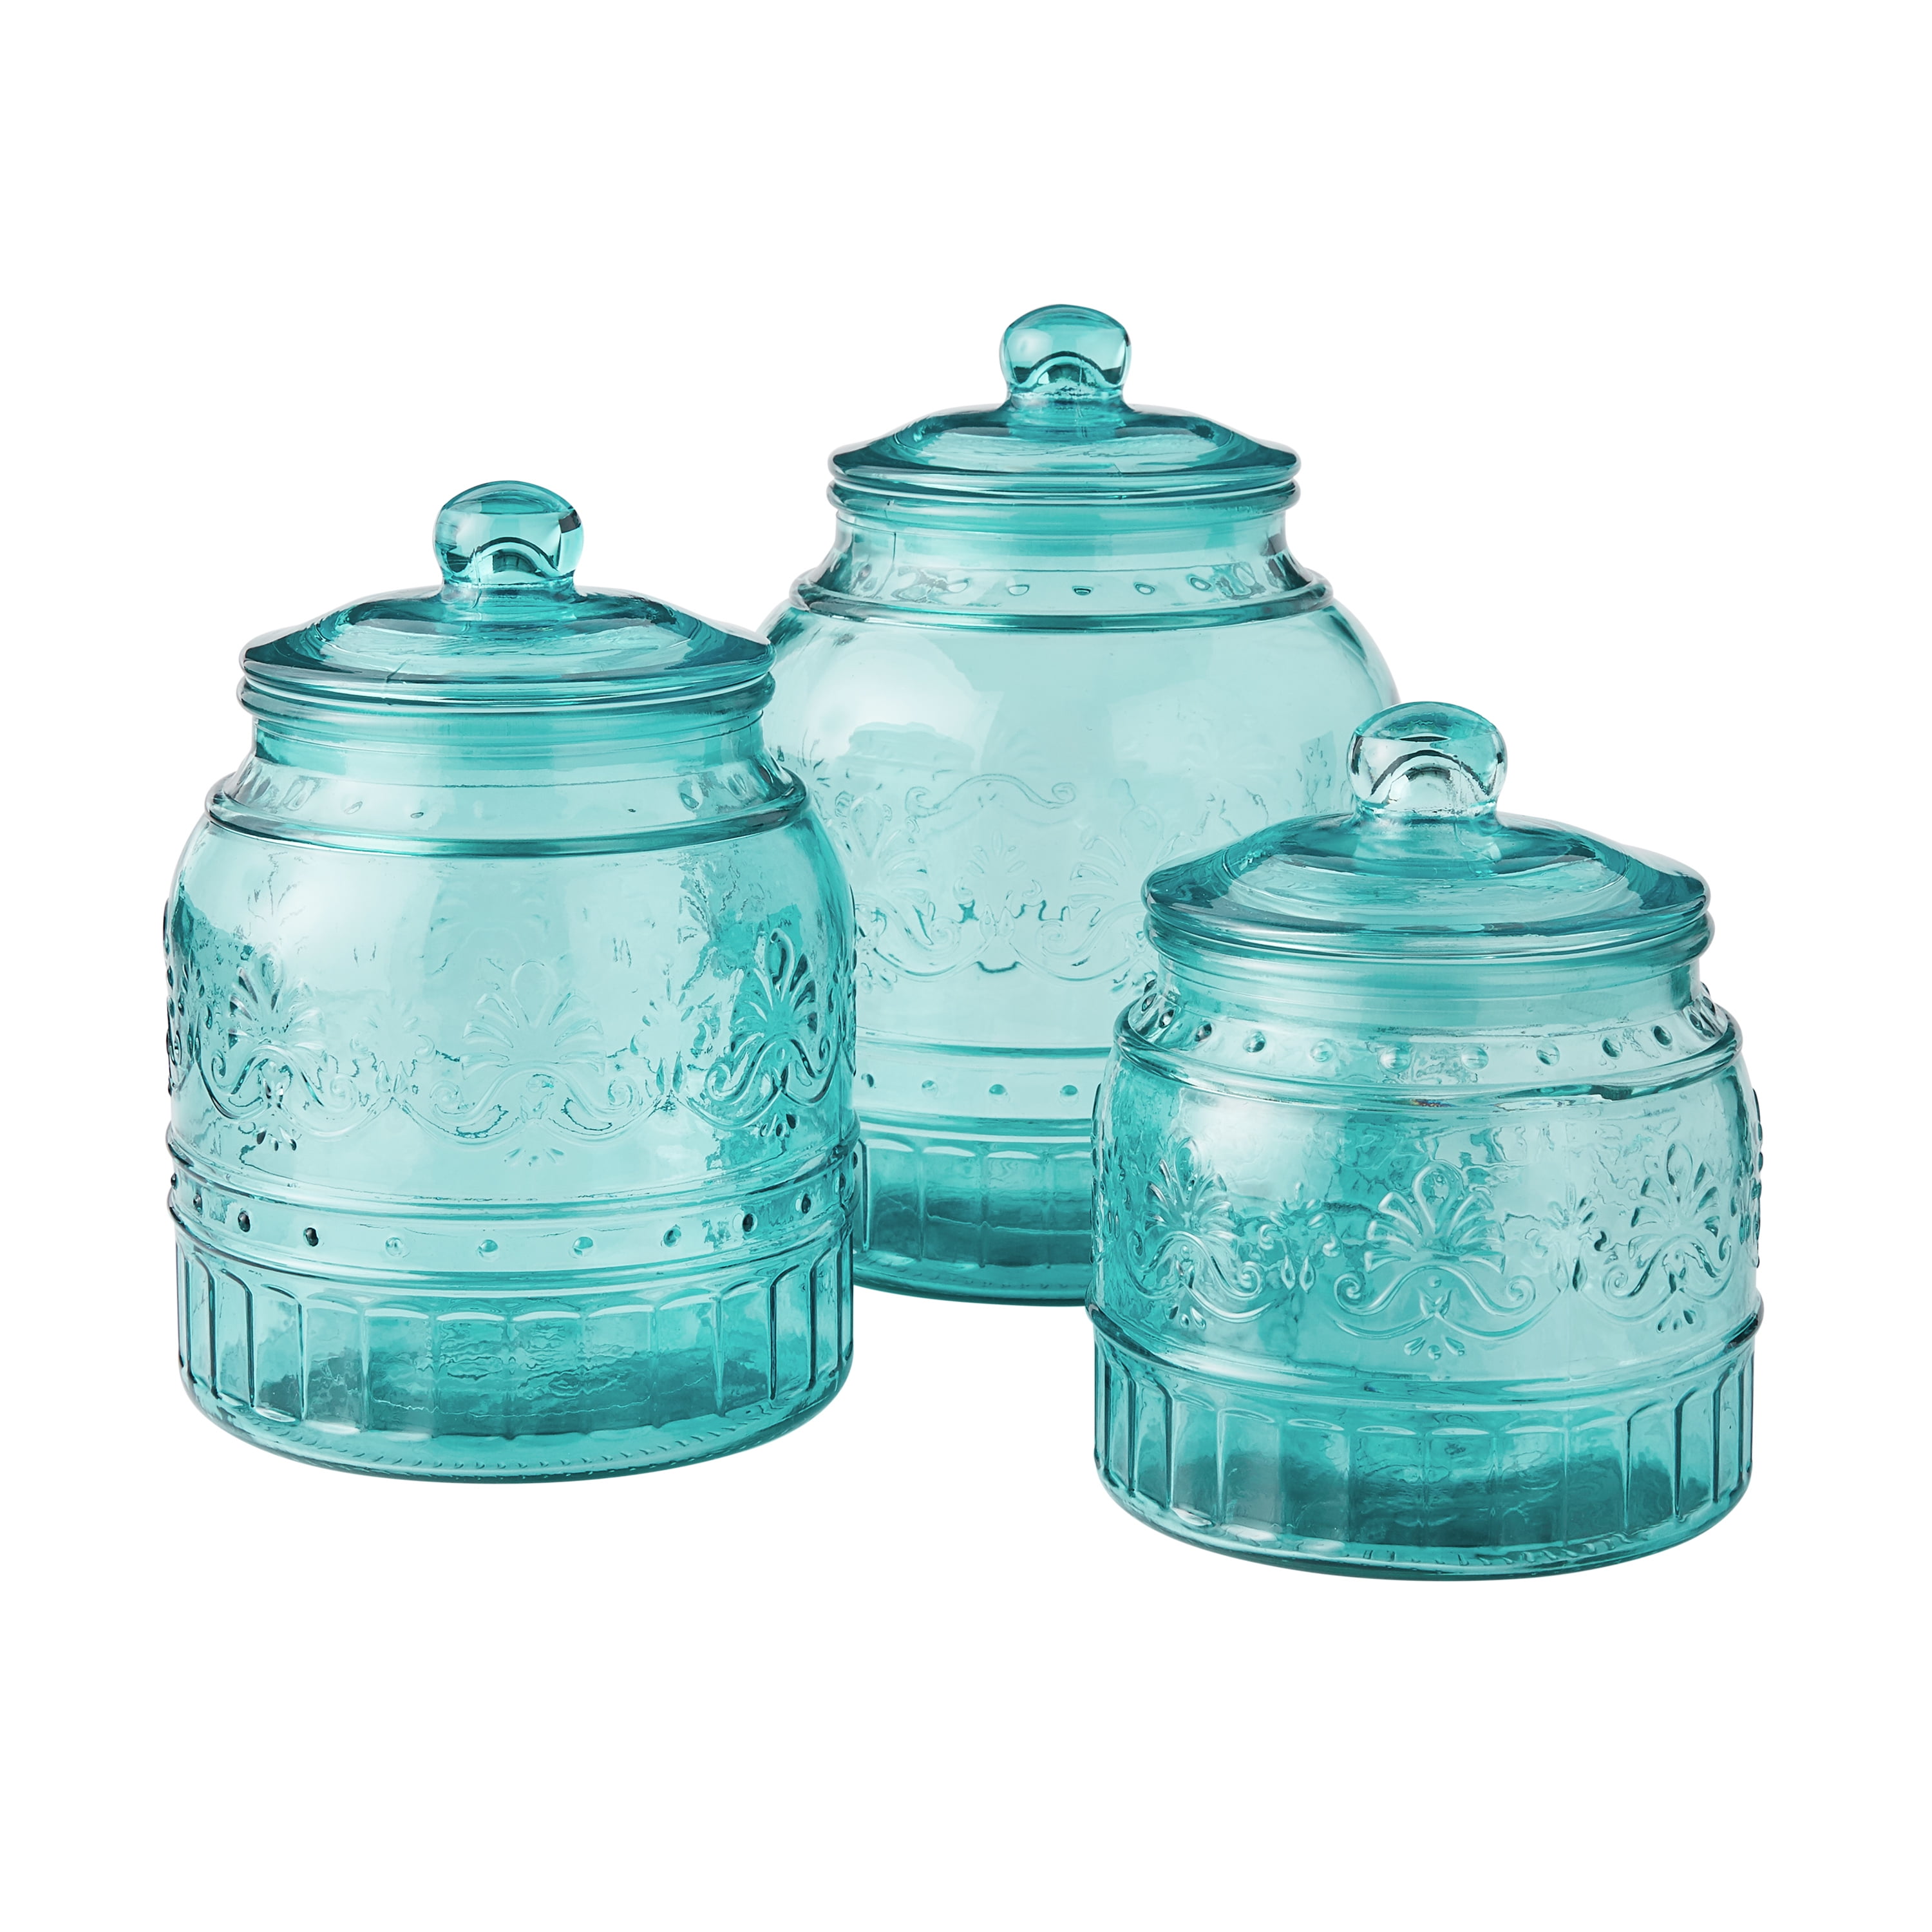 KSP Loop 'Square' Glass Canister with Lid - Set of 3 (Clear)